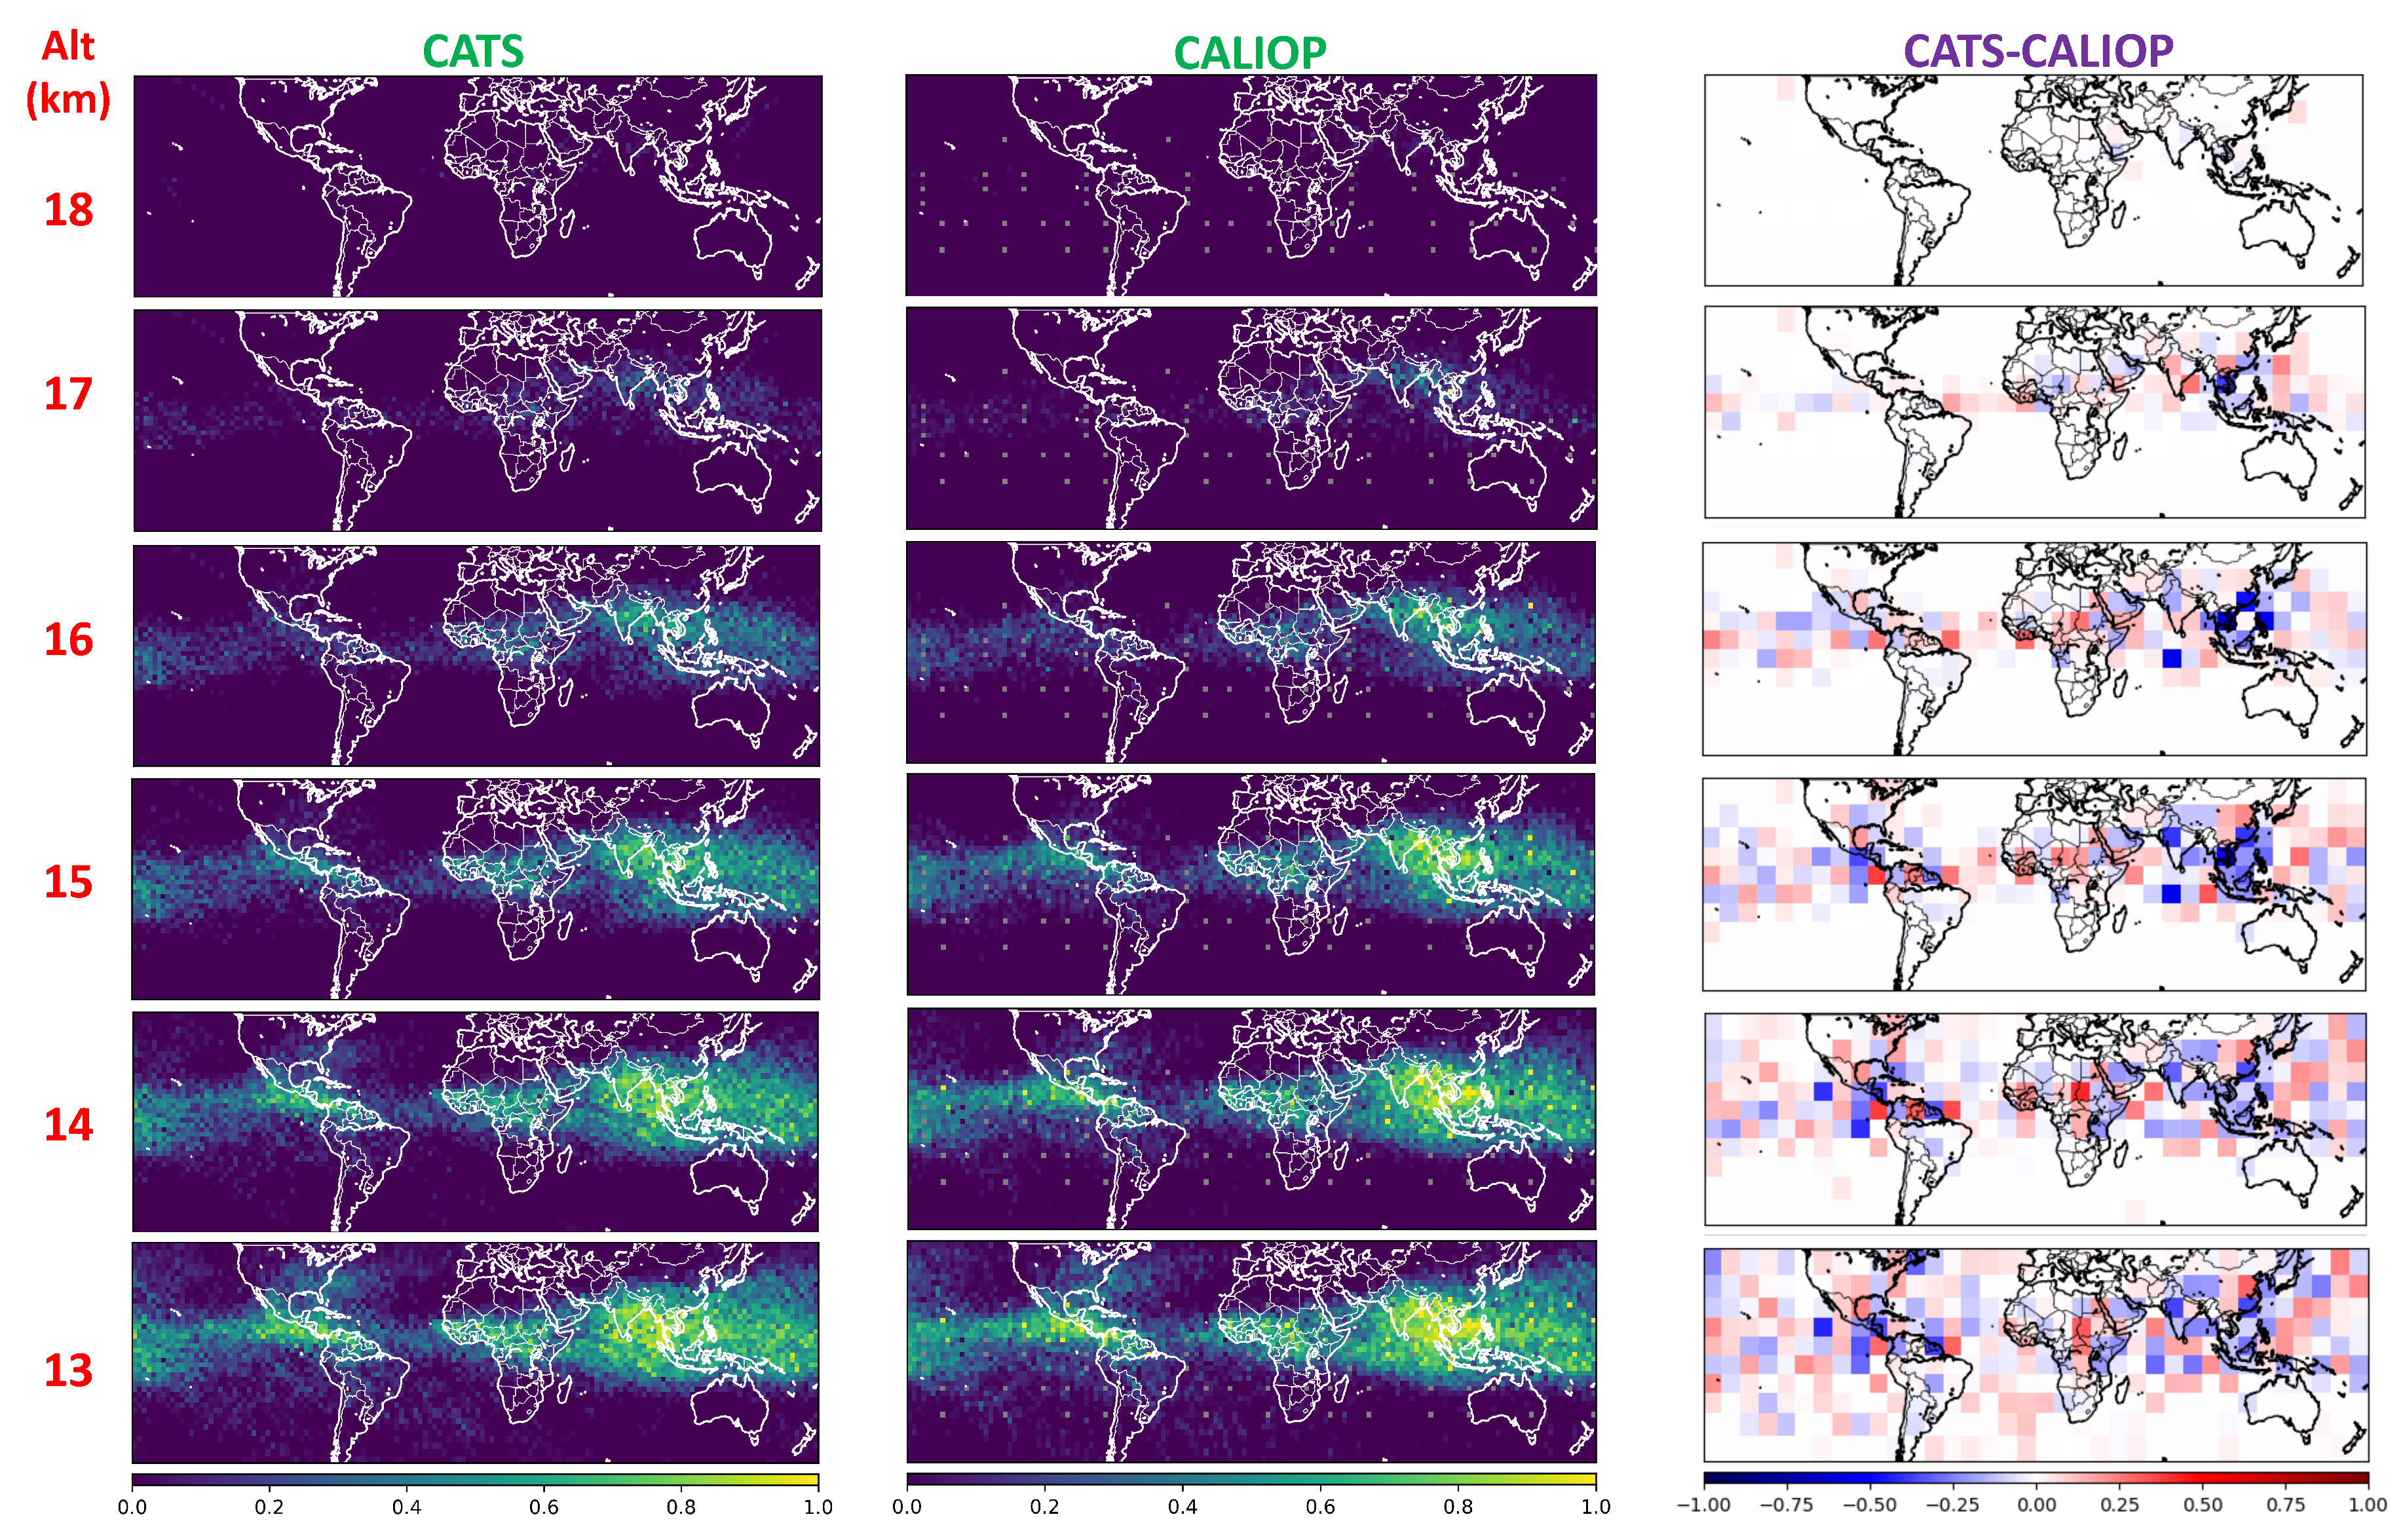 remote sensing free full text comparison of iss cats and calipso caliop characterization of high clouds in the tropics html